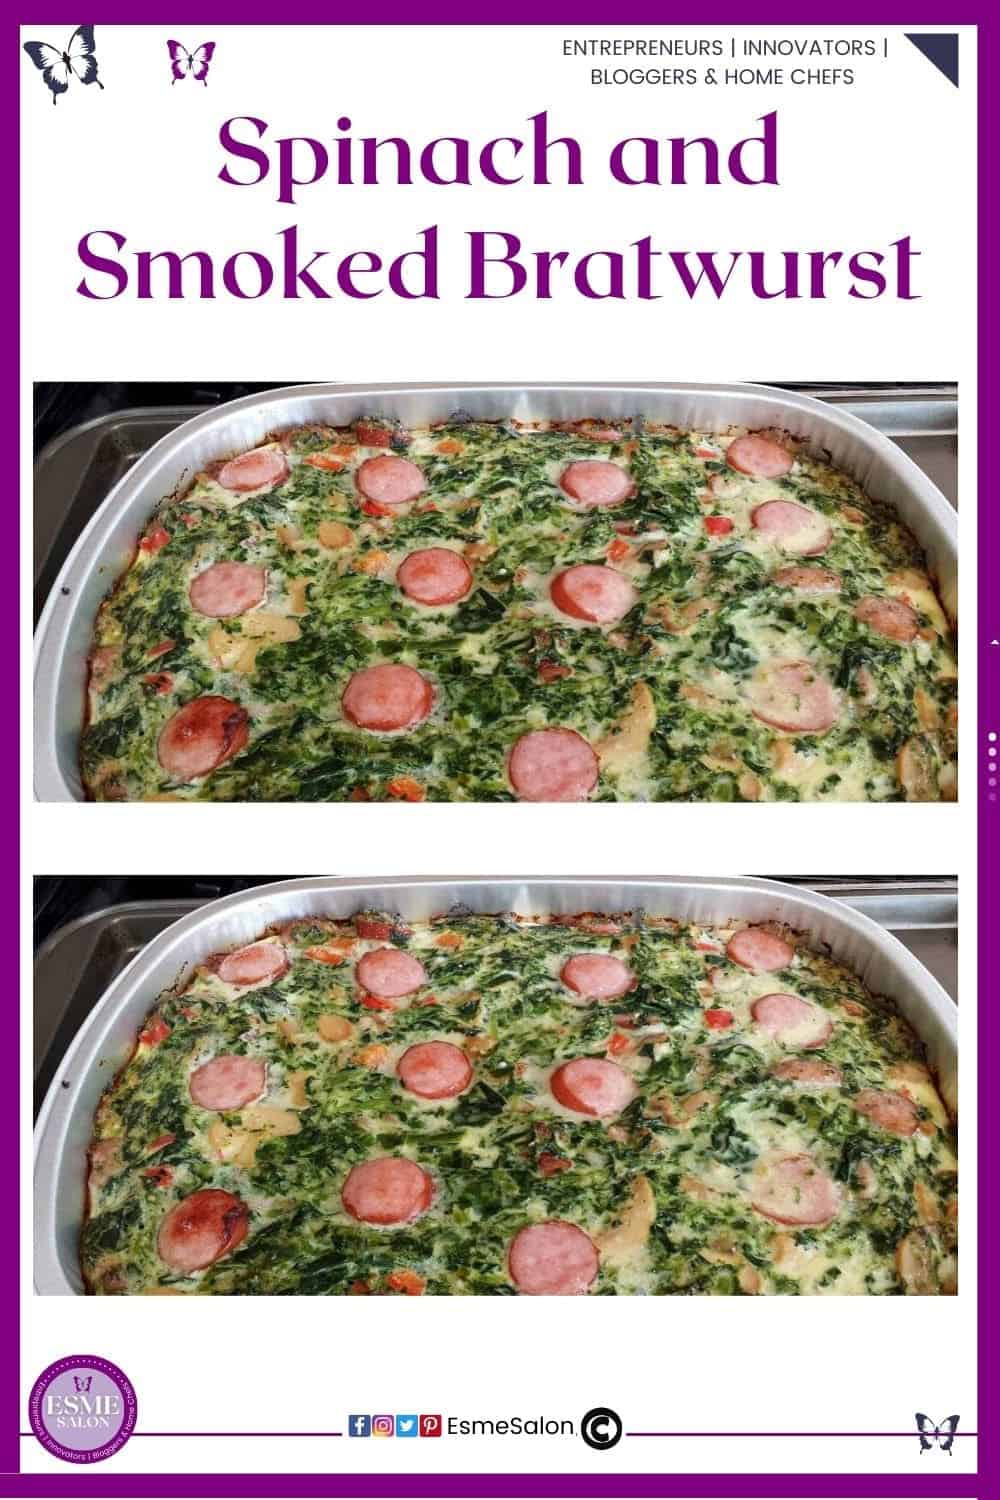 an image of a tinfoil dish filled with Spinach and Smoked Bratwurst and egg bake